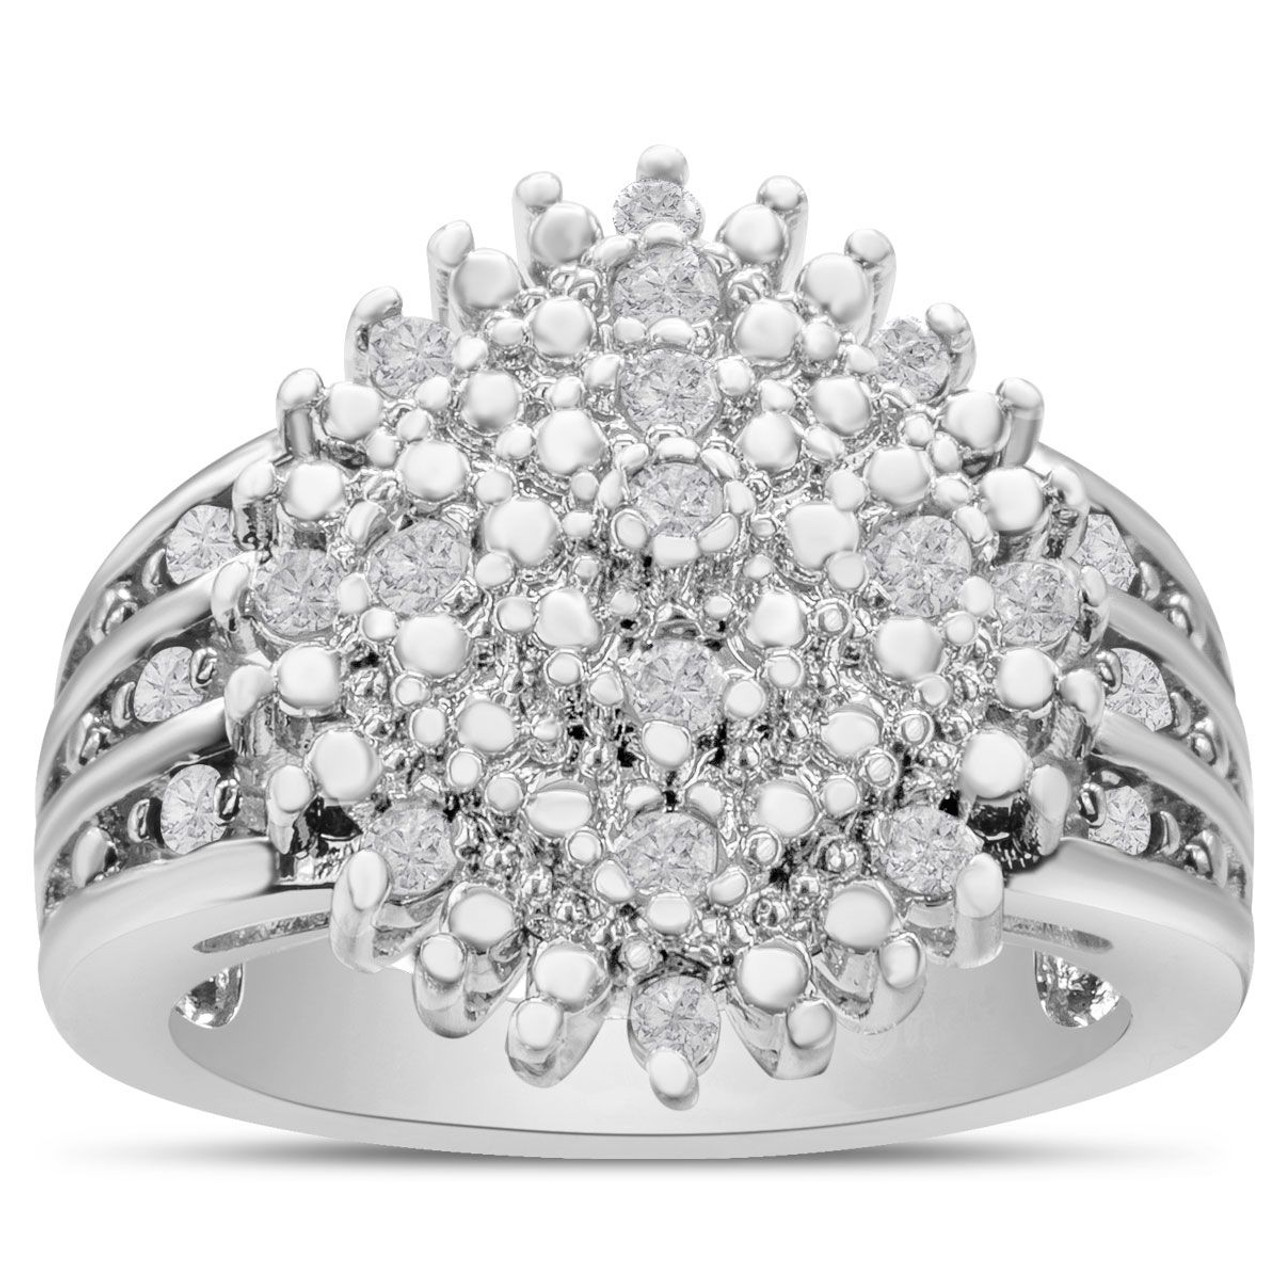 0.42CT Diamond Cocktail Ring product image